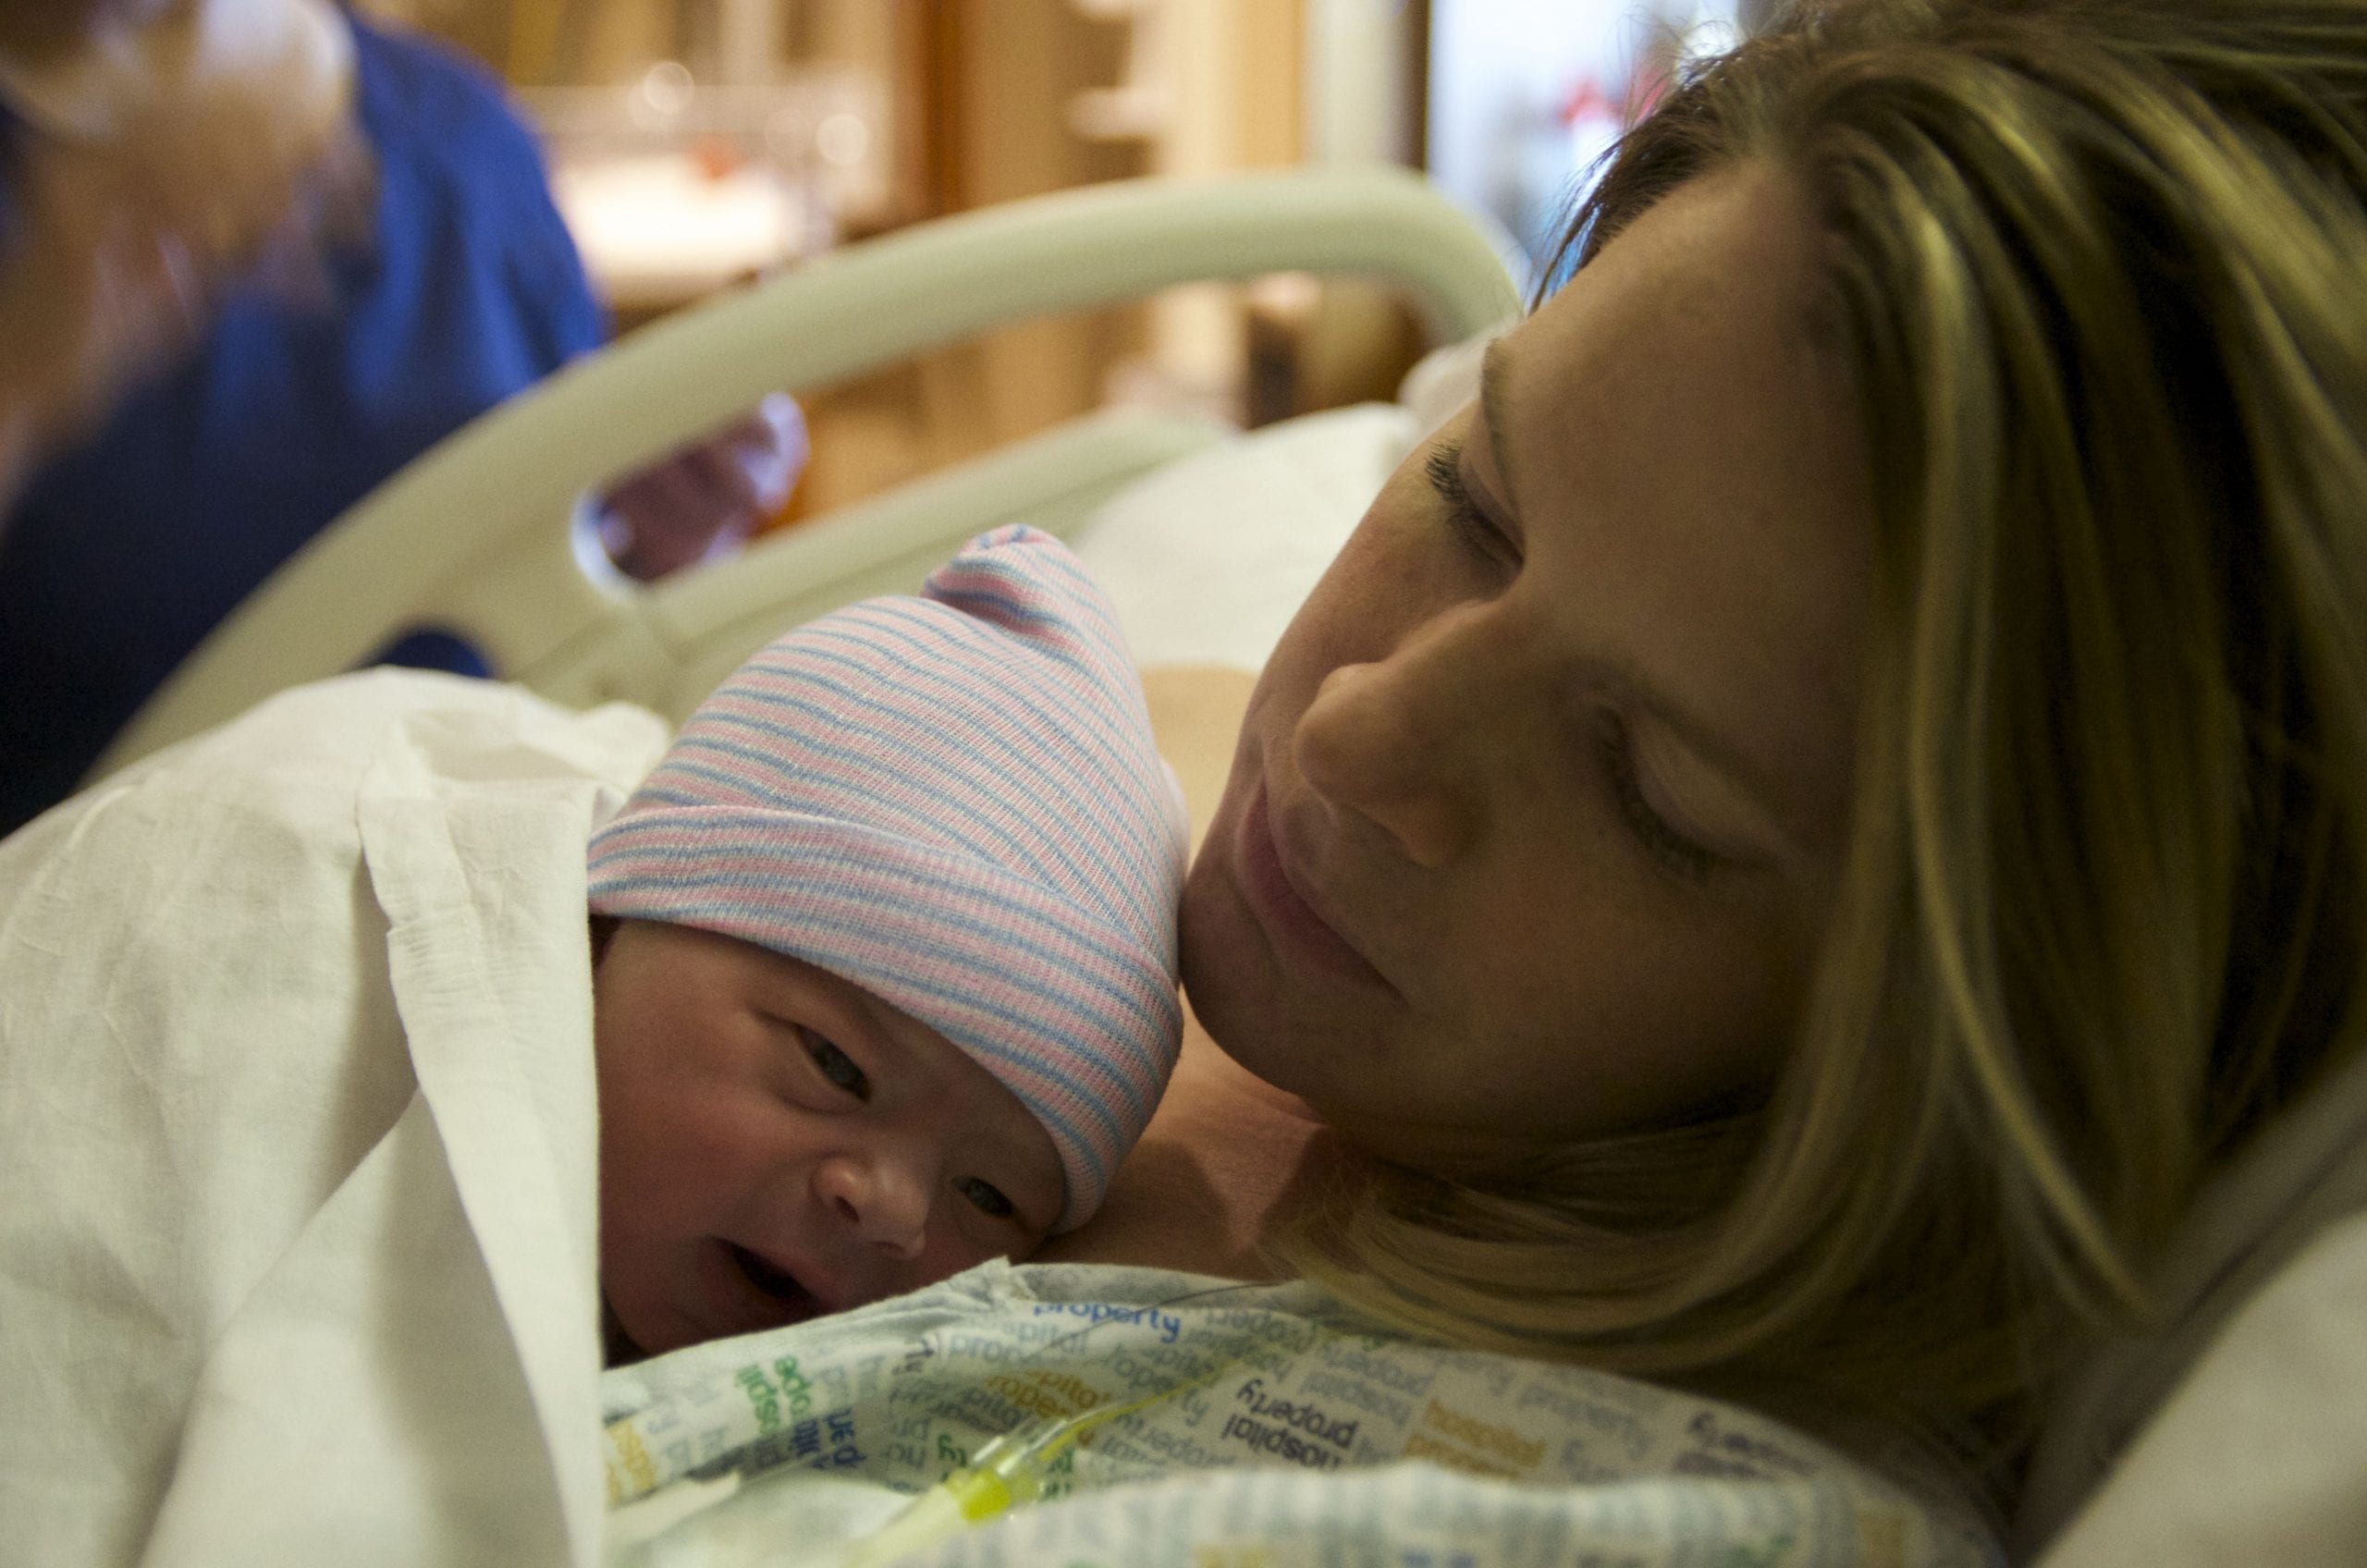 New Moms: Watch For These Warning Signs After Giving Birth